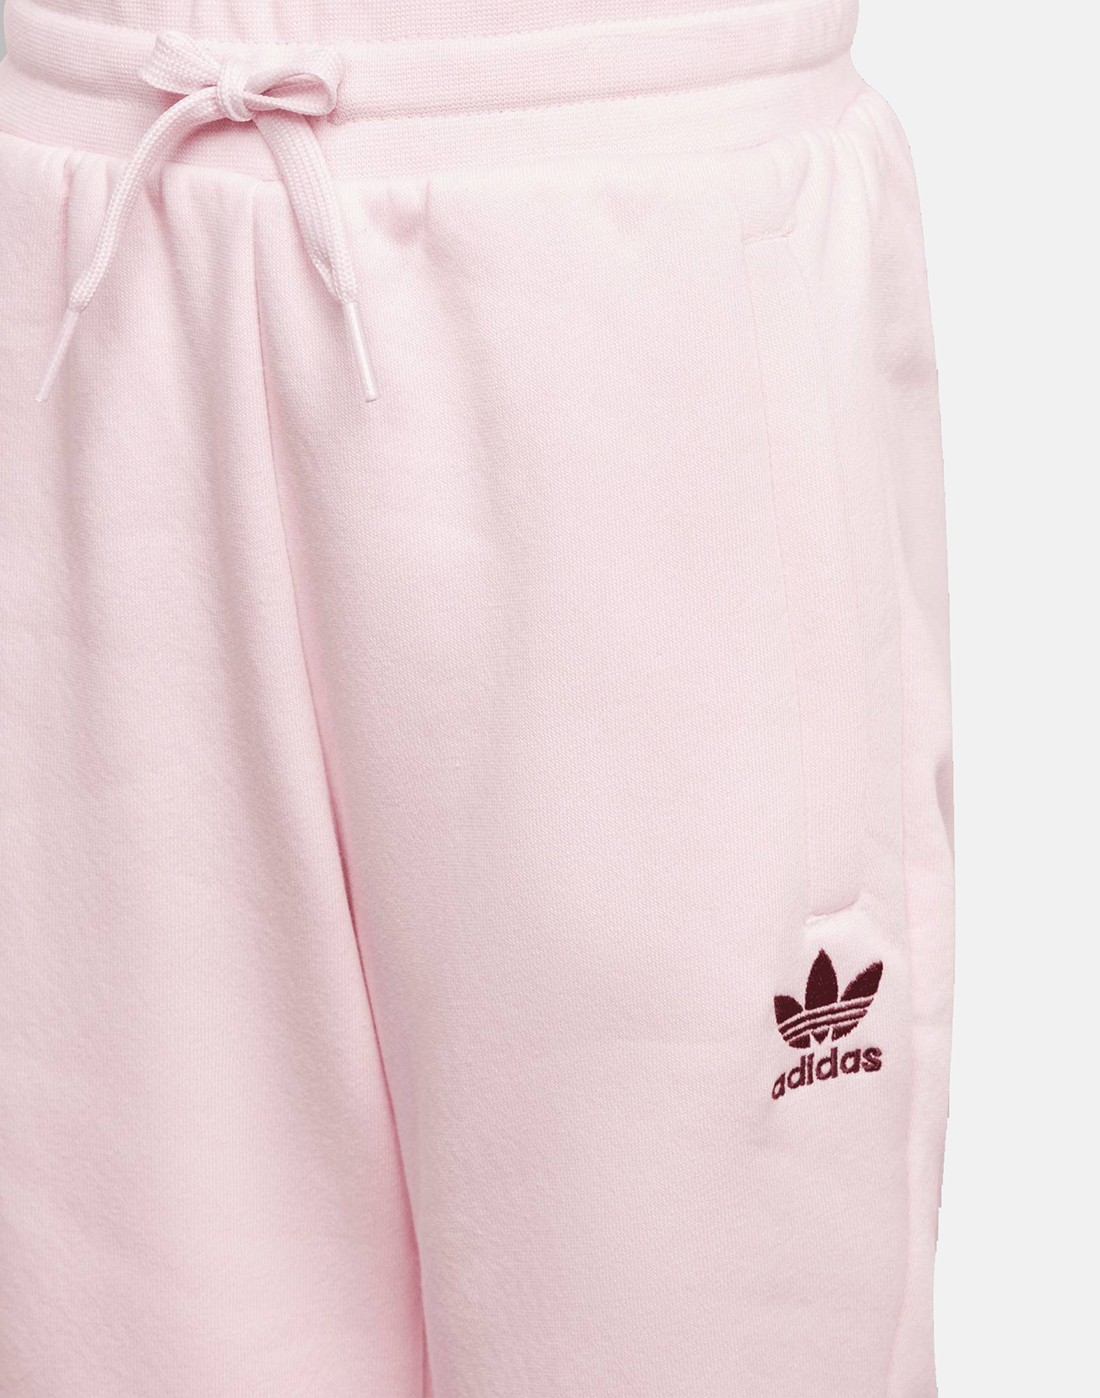 adidas Originals Younger Girls Crew Set - Pink | Life Style Sports IE